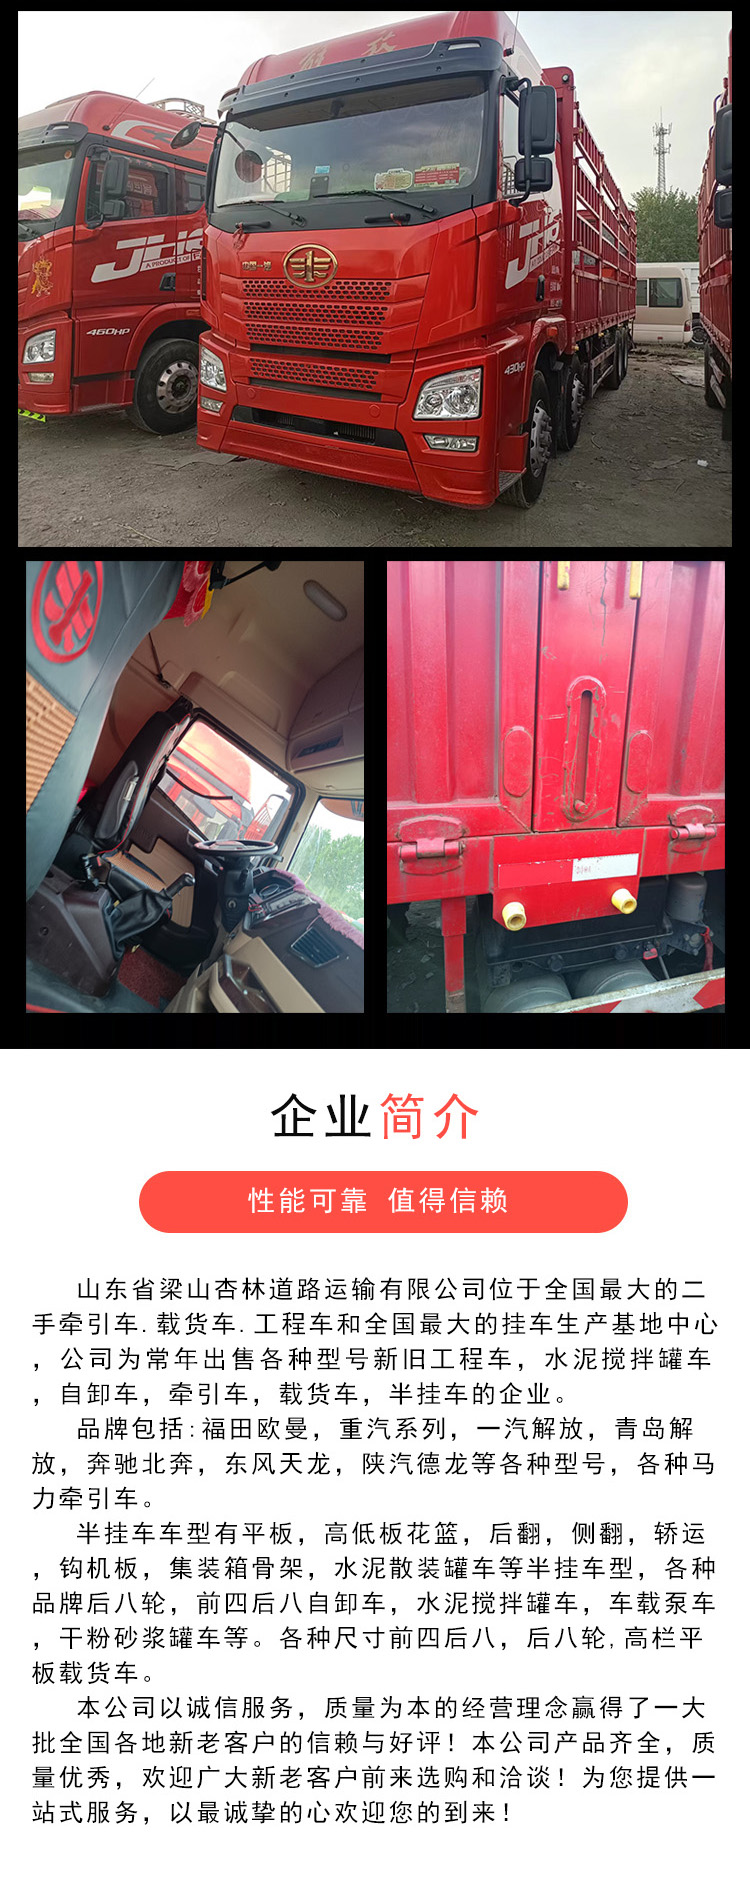 Used 7.7-meter flatbed truck with a national five emission Yuchai engine of 245 horsepower and 0.7-meter capacity